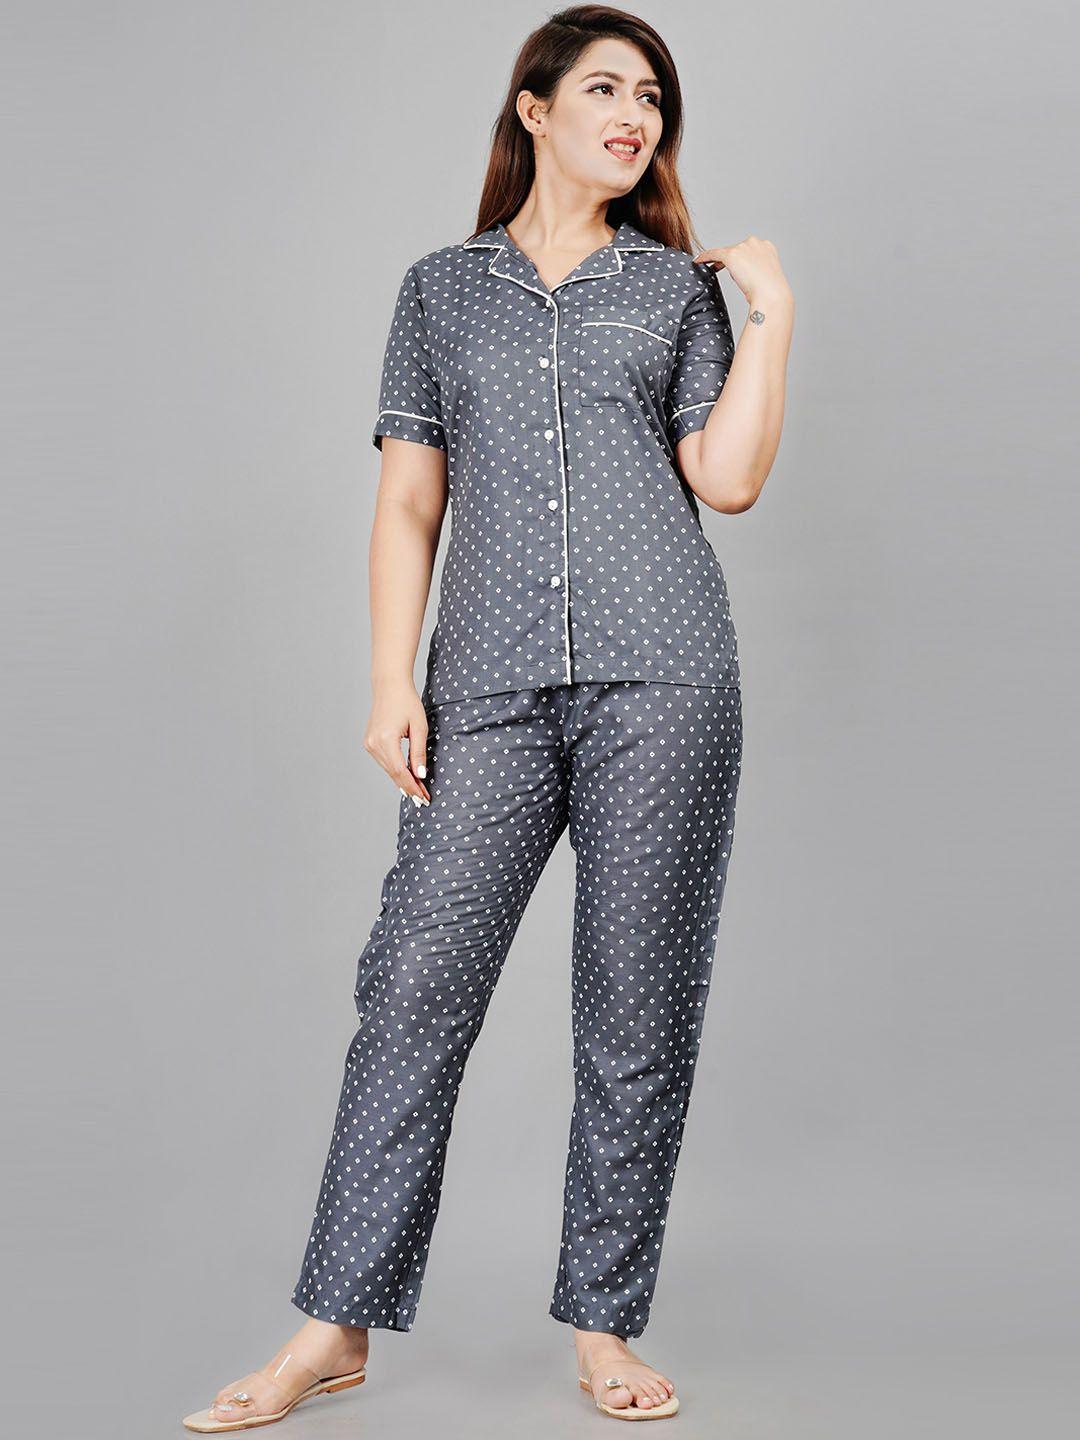 trend-me-polka-dots-printed-pure-cotton-night-suit